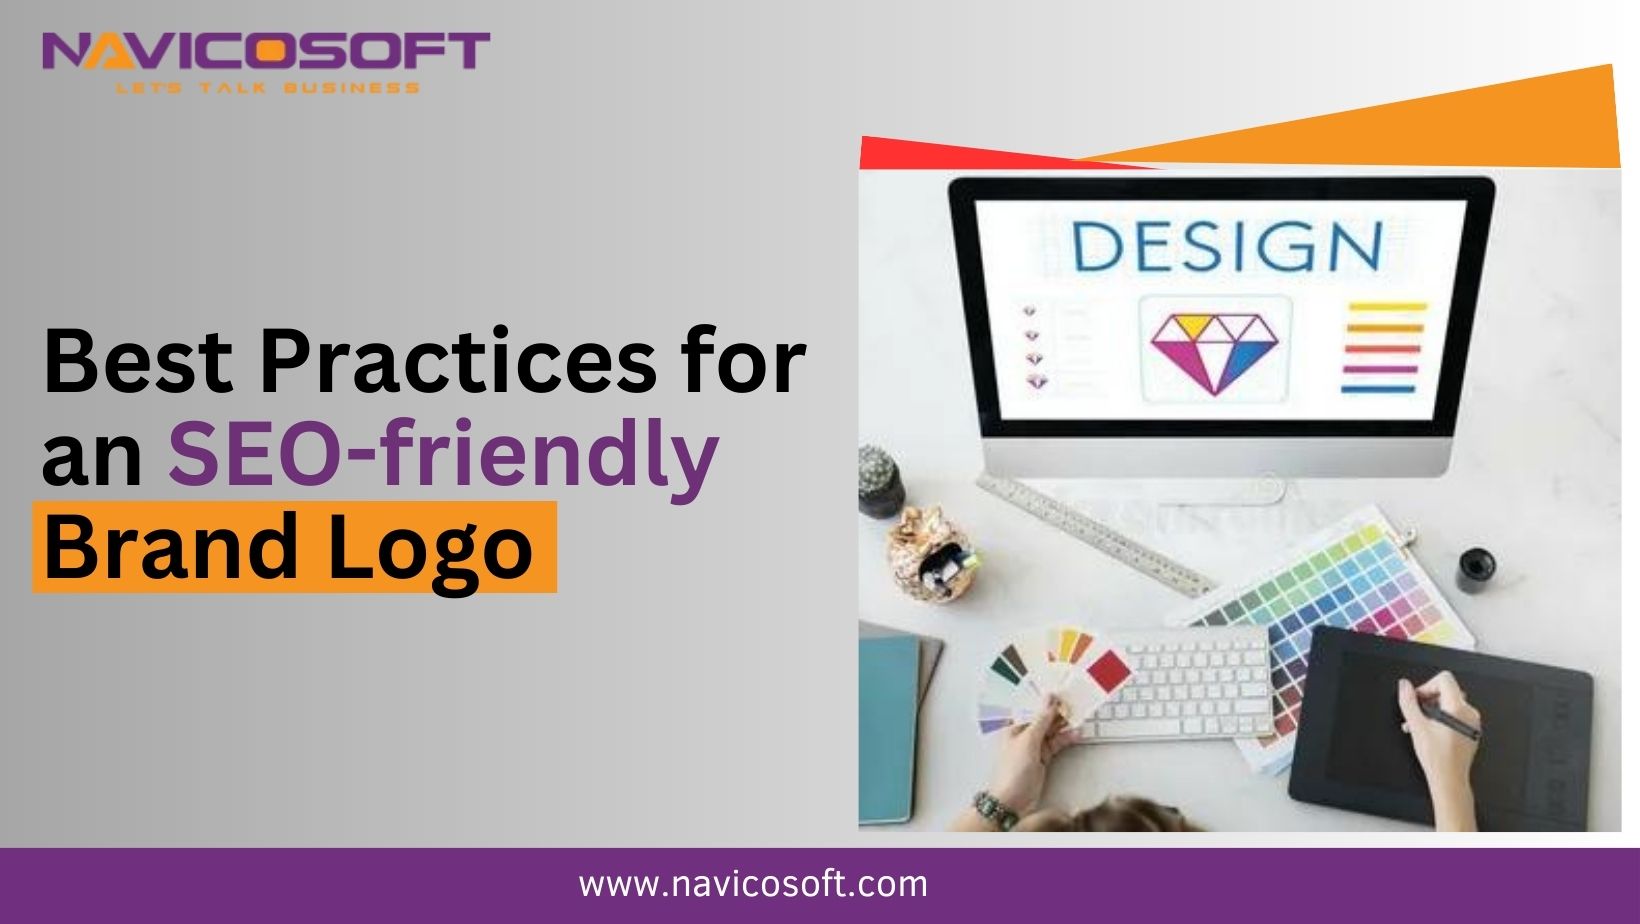 Best Practices for an SEO-friendly Brand Logo